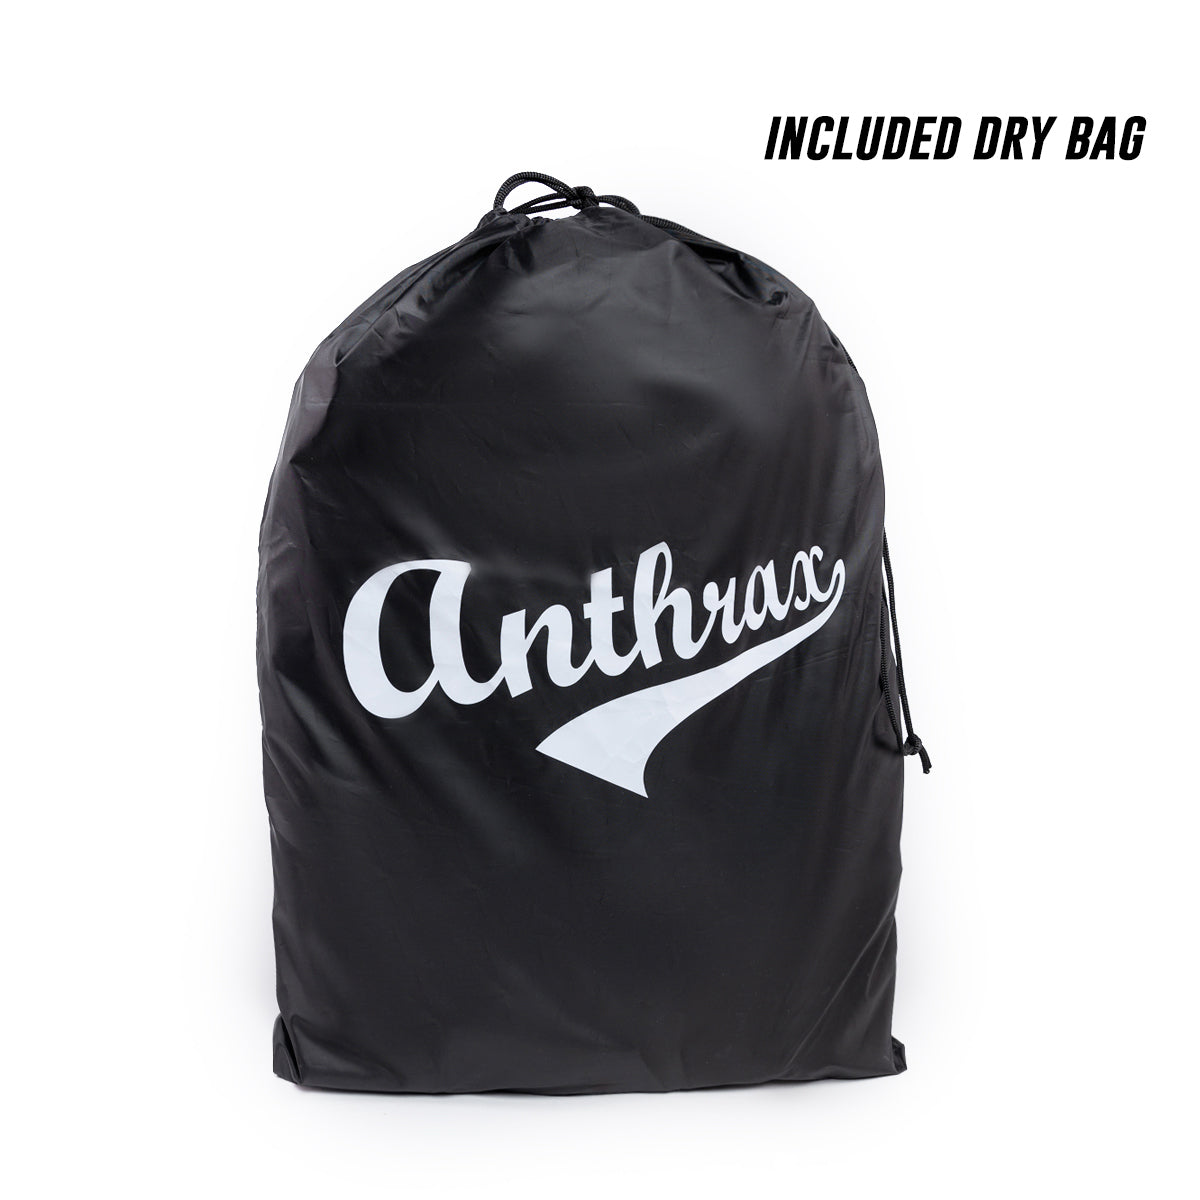 Deployment 3.0 Backpack - All Black 45L Anthrax Machines